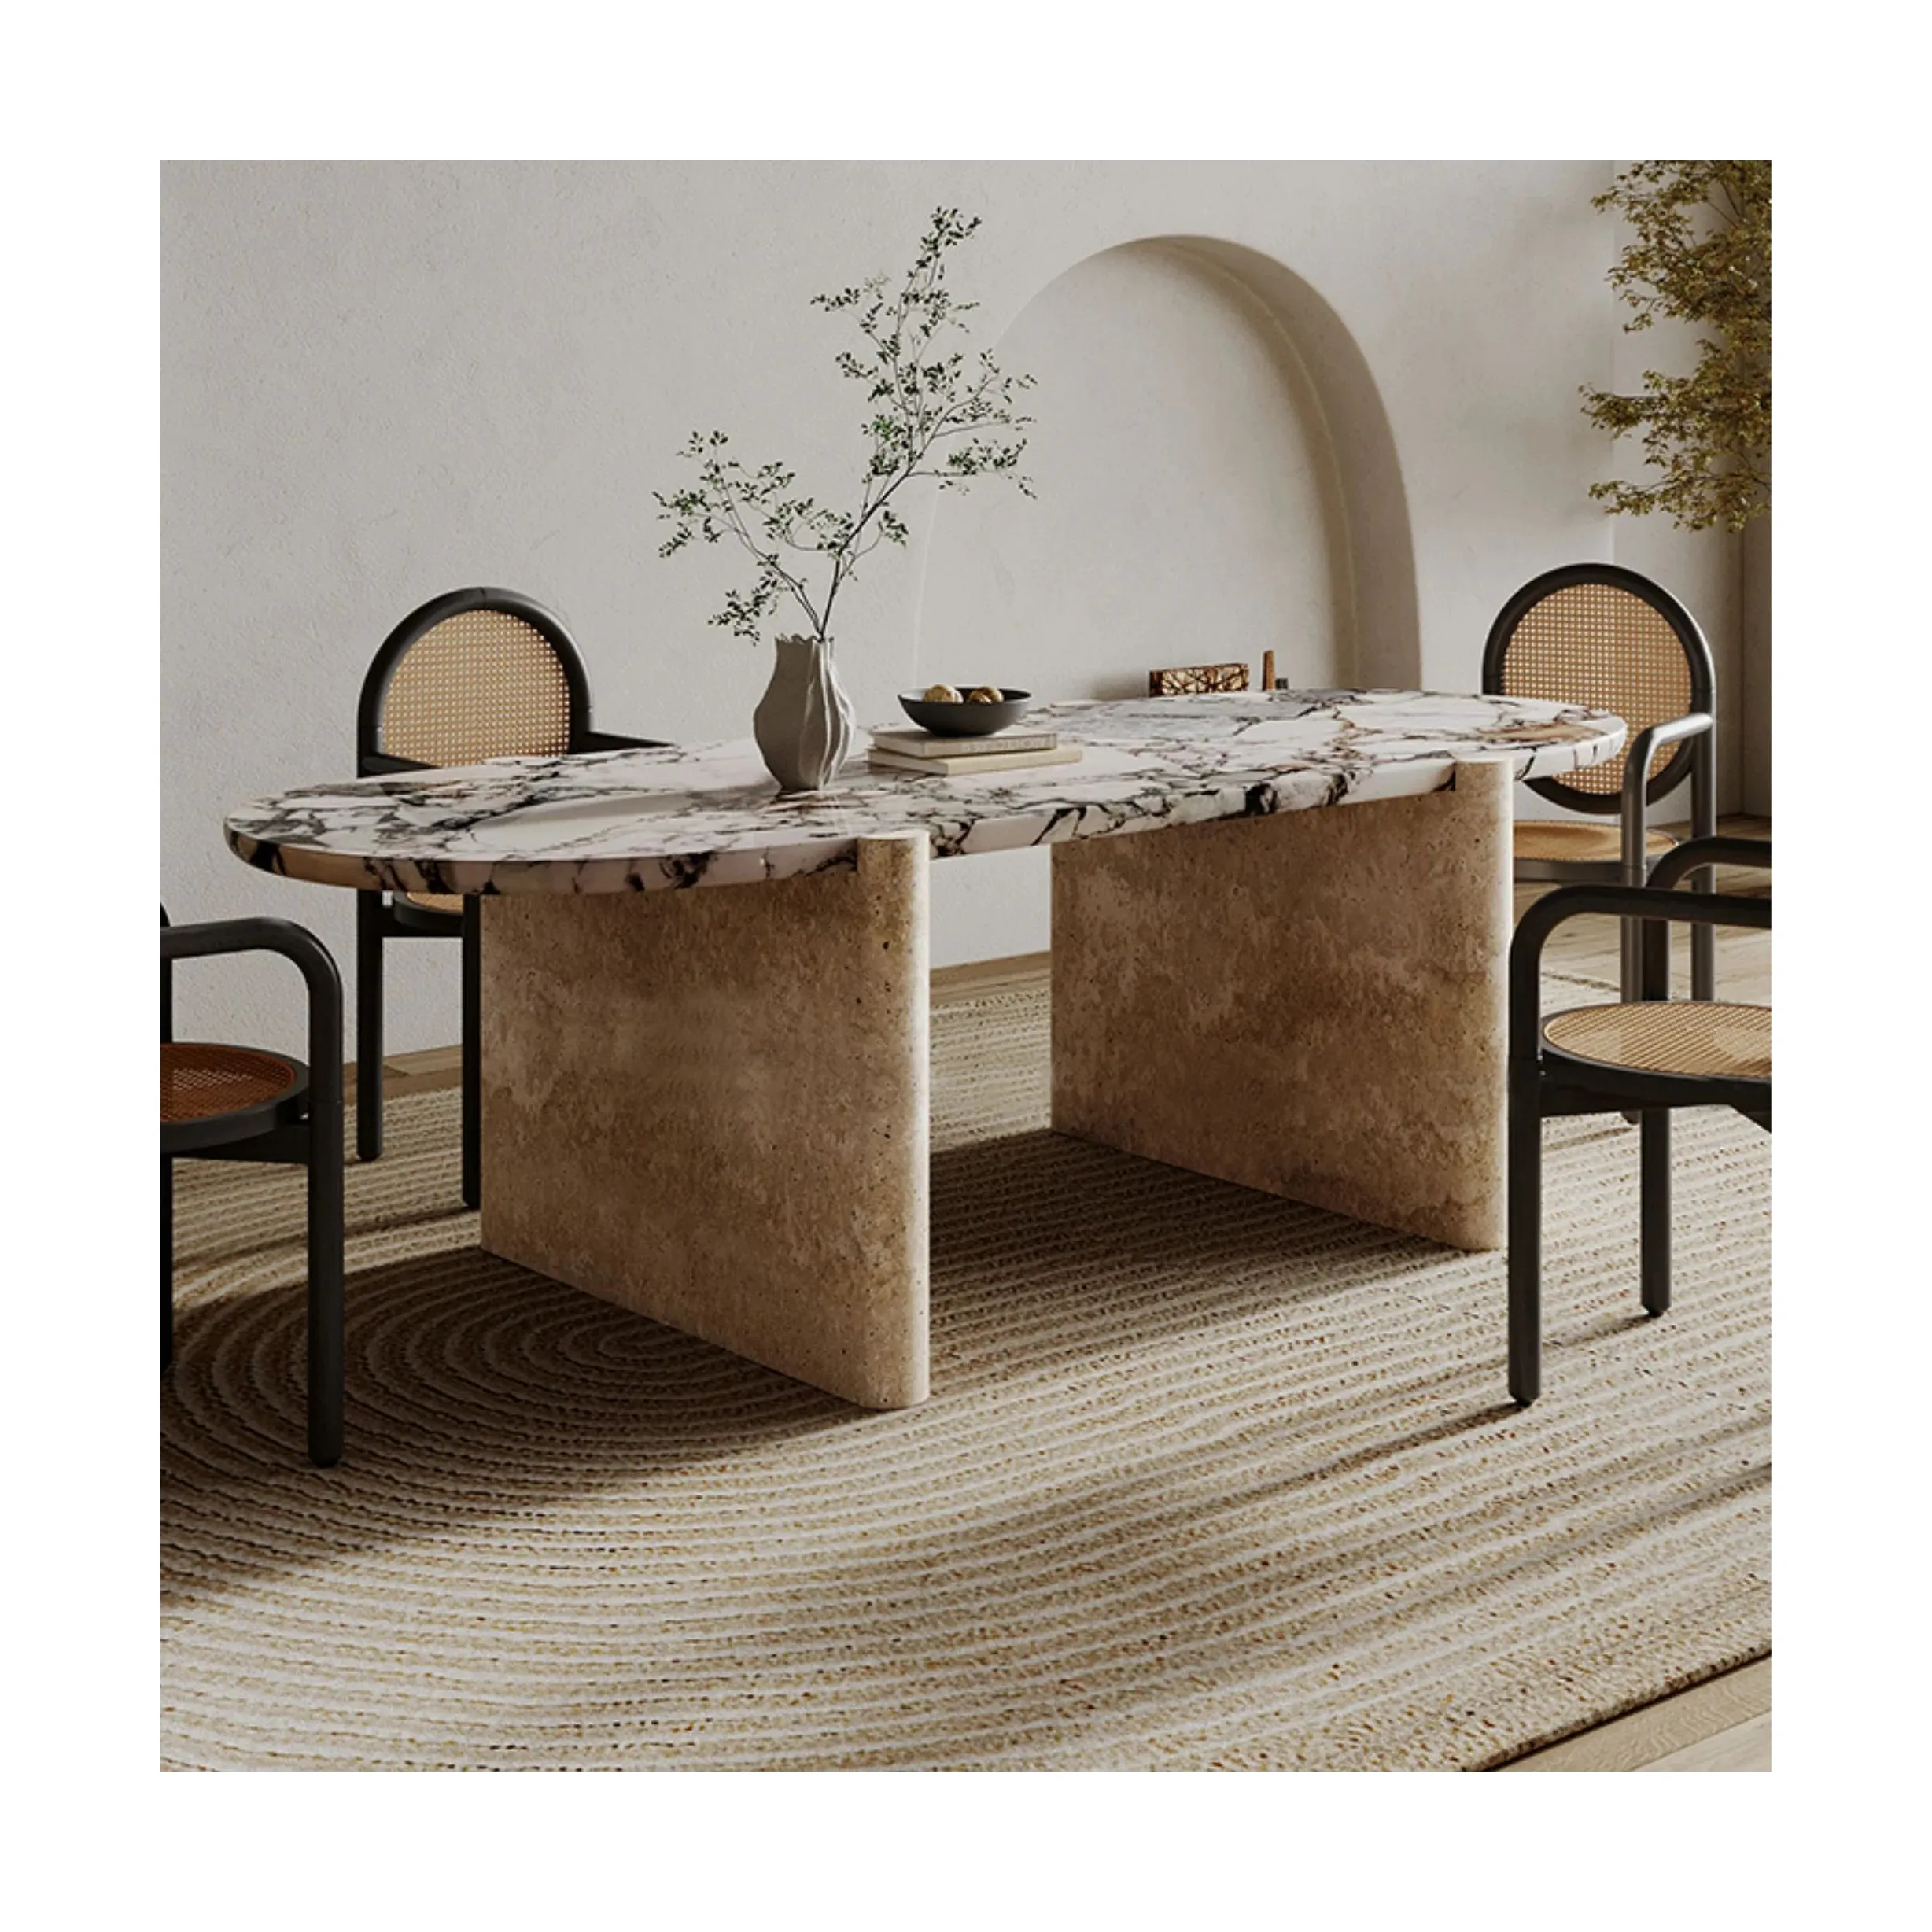 SHIHUI Customized Luxury Dining Room Furniture Modern Natural Oval Marble Travertine Dining Table 6 Seater